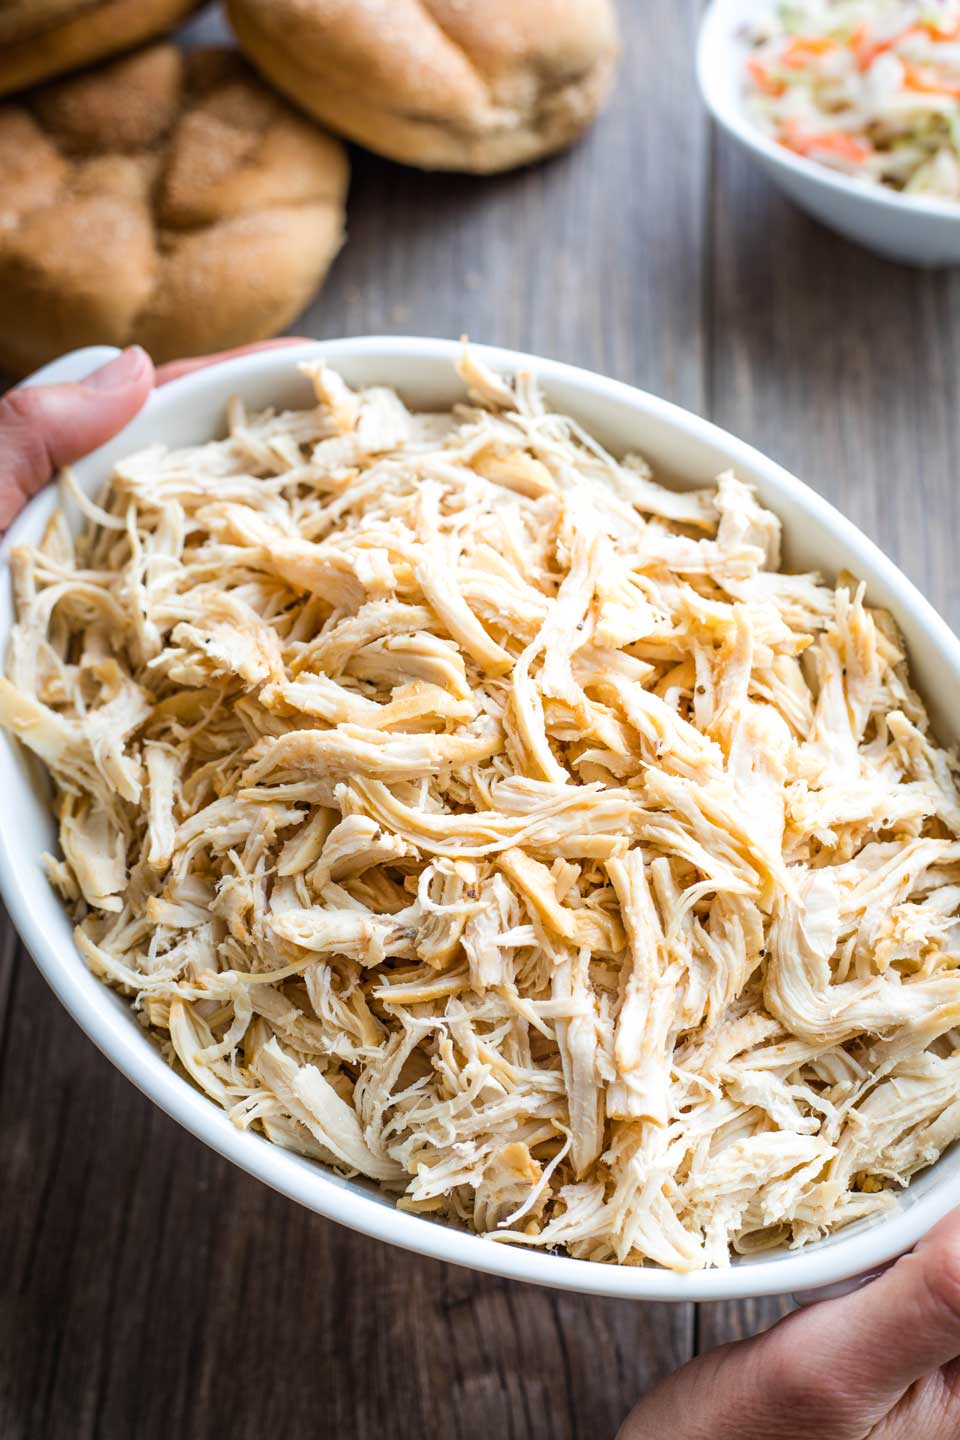 hands holding a serving bowl of shredded chicken, with buns and coleslaw in the background